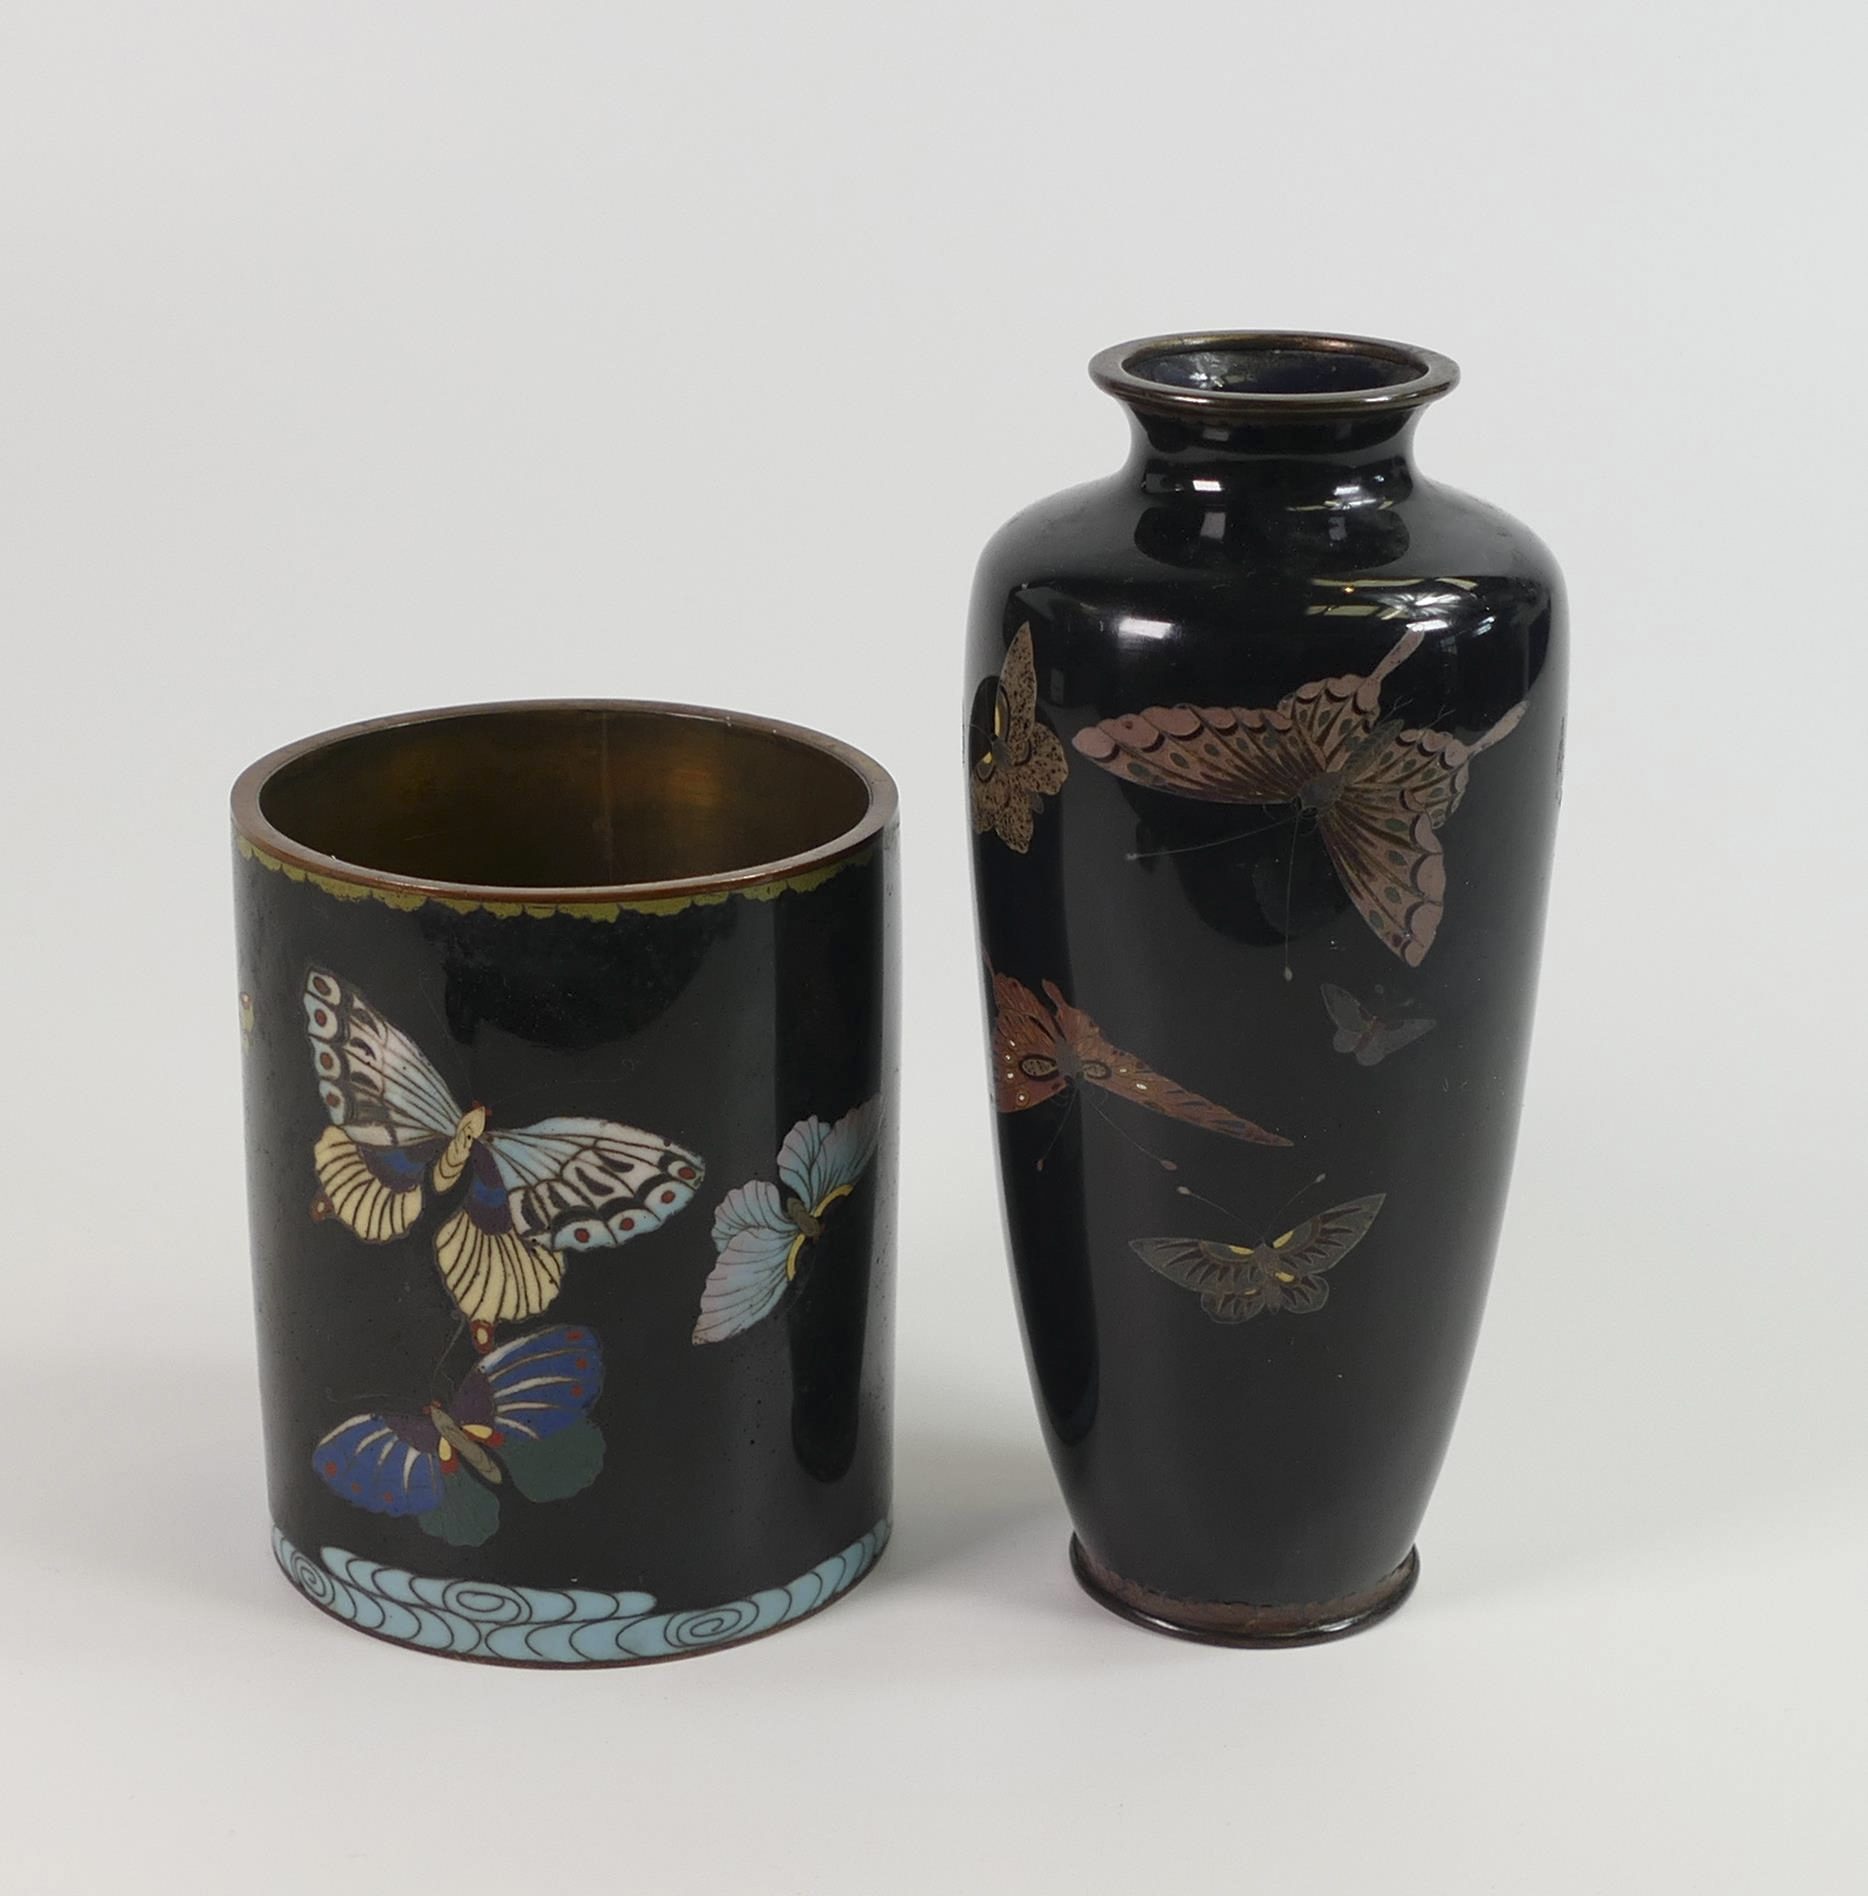 Lot 587 was a Cloisonne Enamel Vase & Pot decorated with butterflies that found a hammer price of £300.